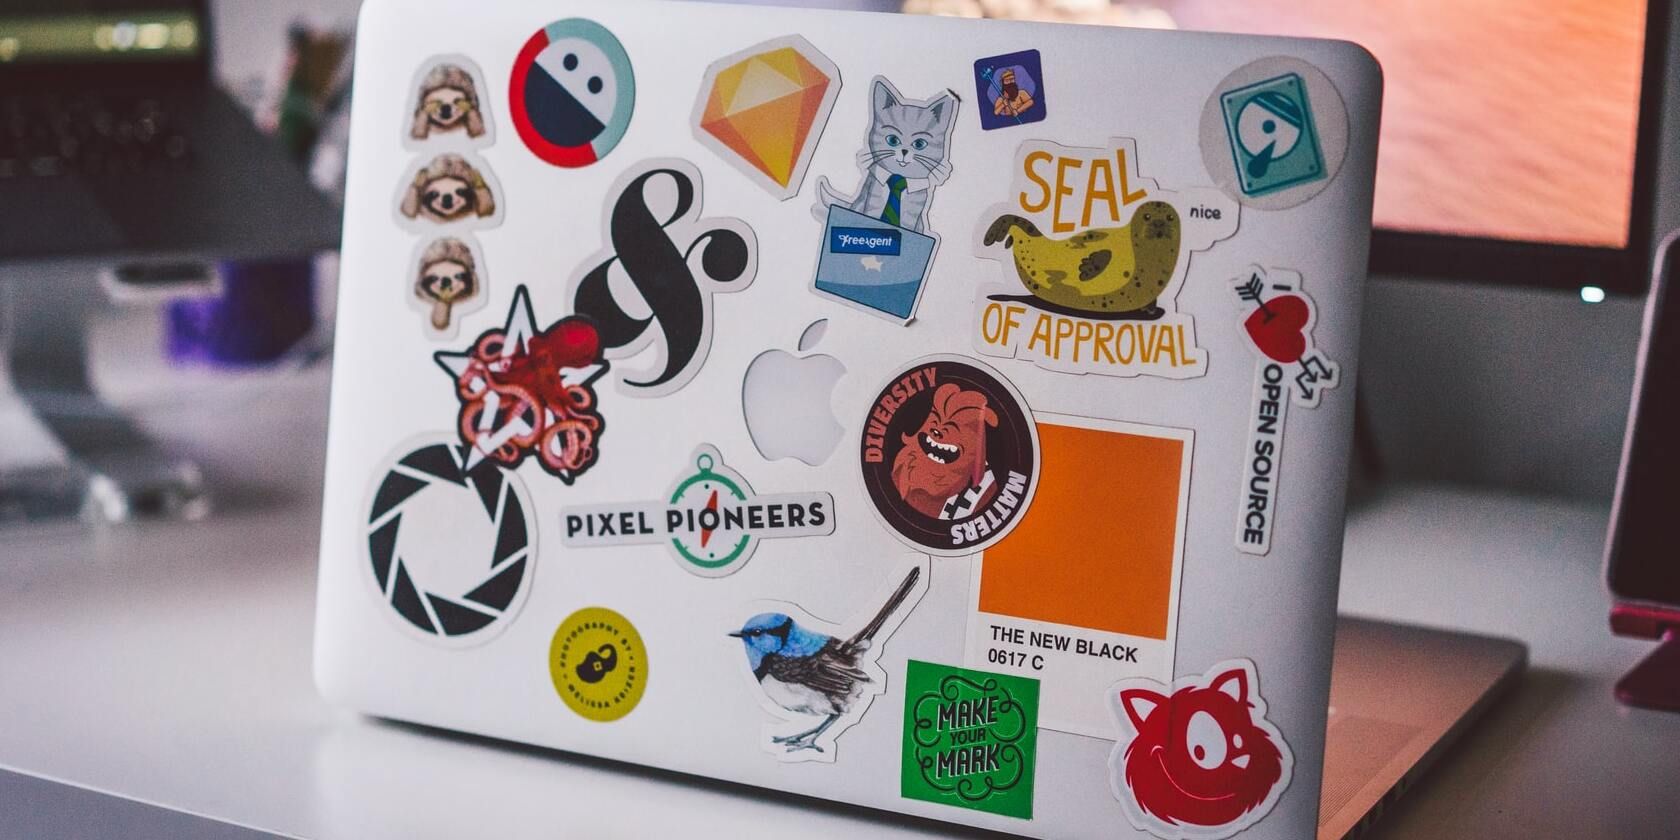 How to Safely Remove Stickers from a Laptop: 3 Easy Tricks